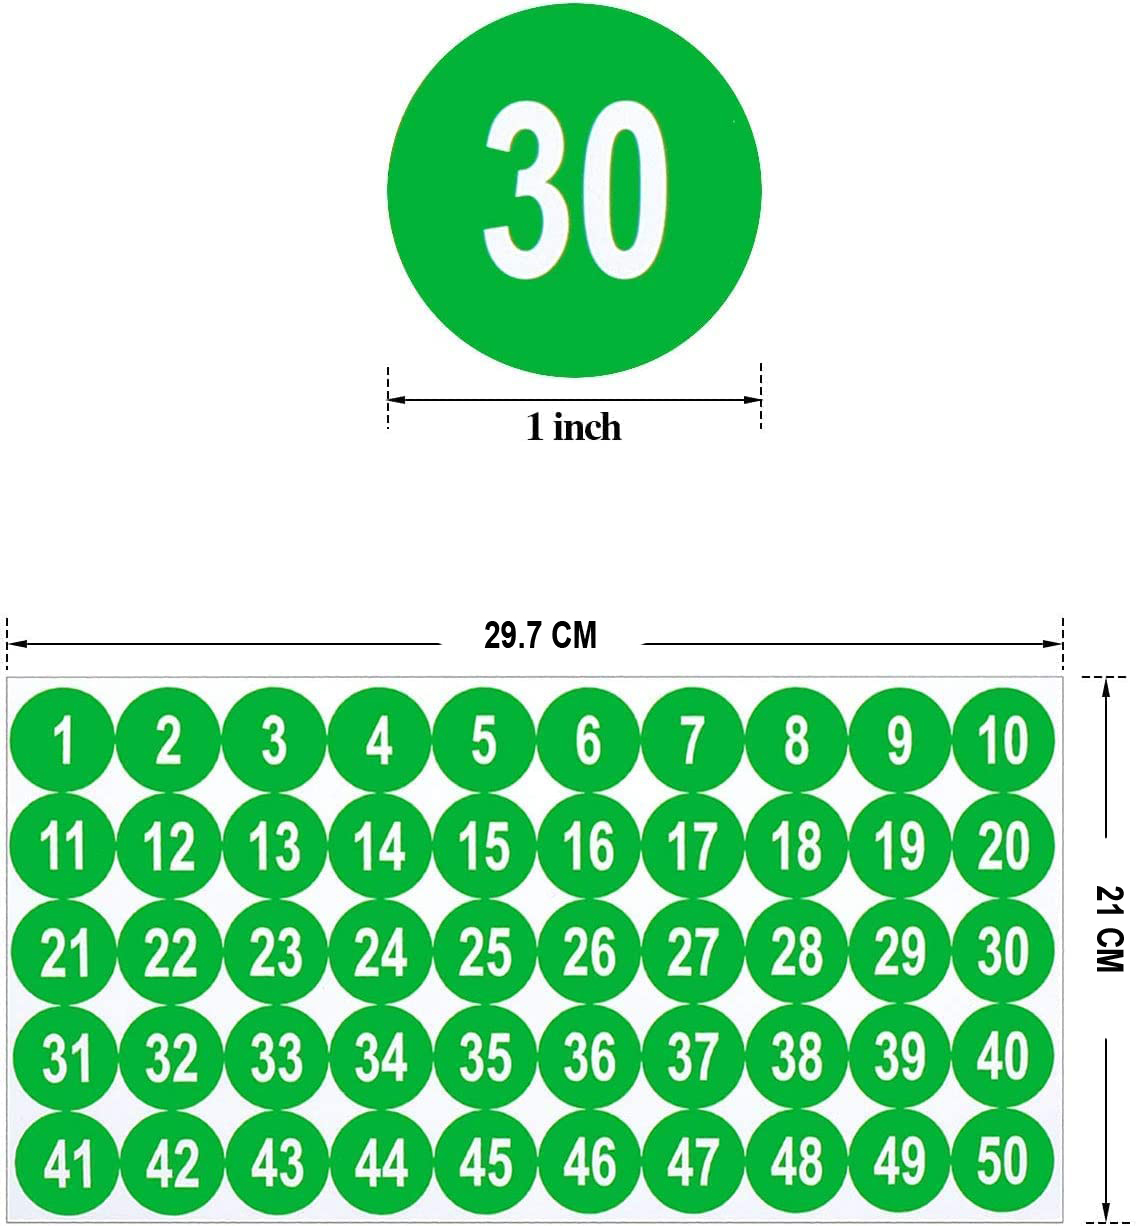 Round stickers with numbers from 1 to 50, green